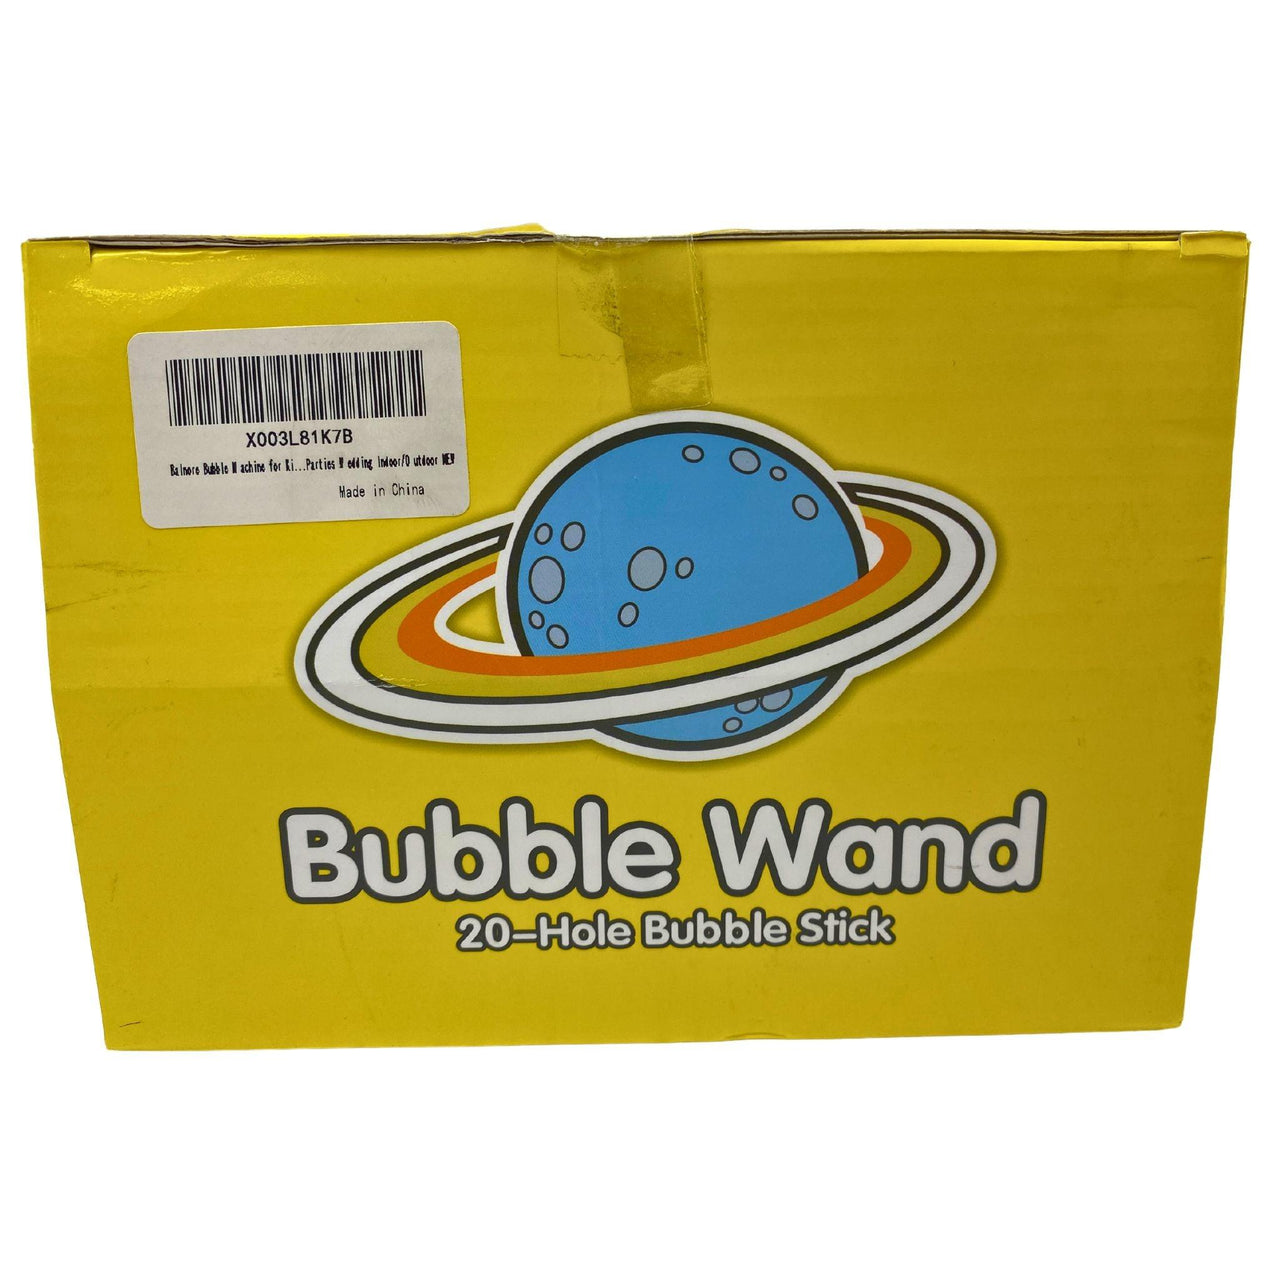 Bubble Wand Double Hole Cartoon Bubble Wand Machine for kids indoor/outdoor (50 Pcs Lot) - Discount Wholesalers Inc